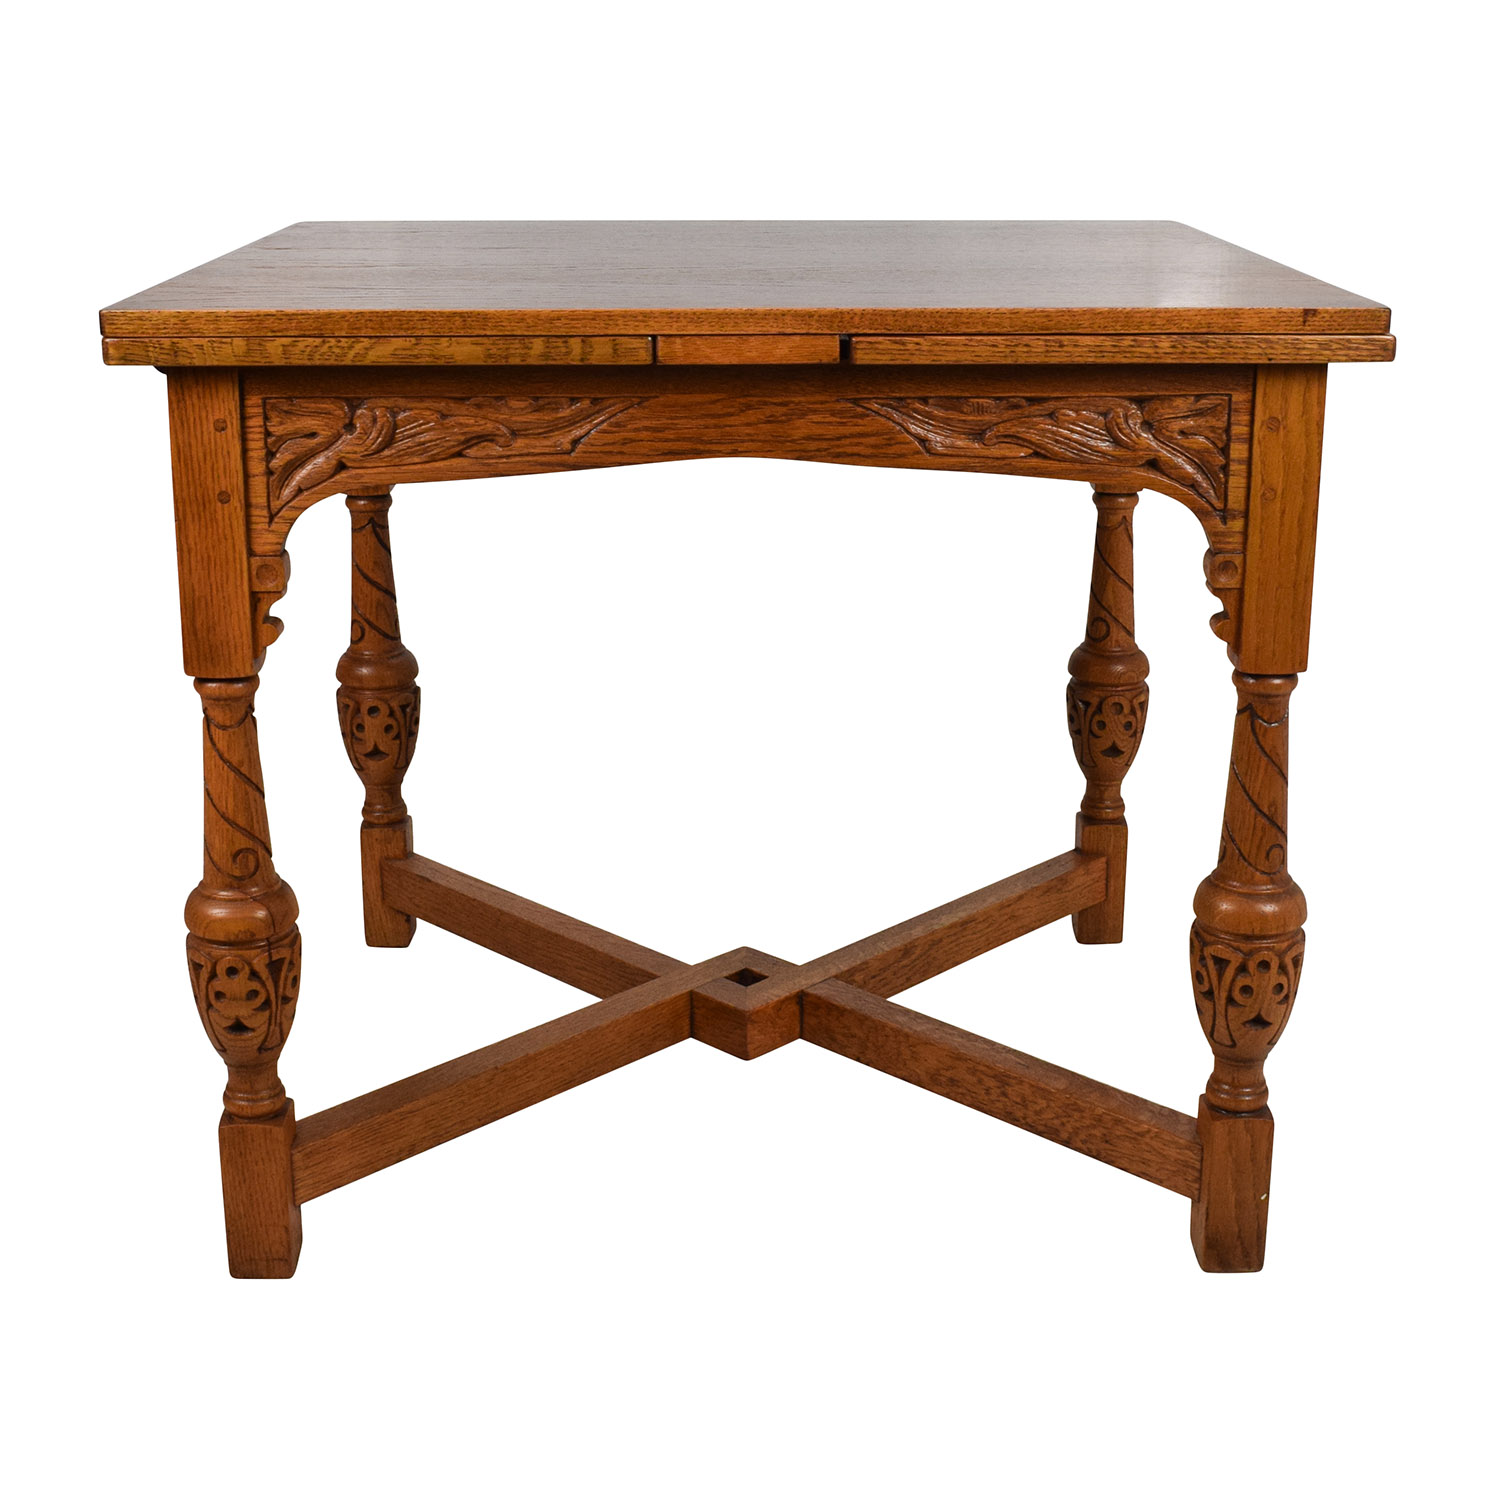 off antique oak extendable dining table tables sell accent large kitchen clocks vegas furniture magnussen coffee square garden cover round gold mirror pottery barn room console